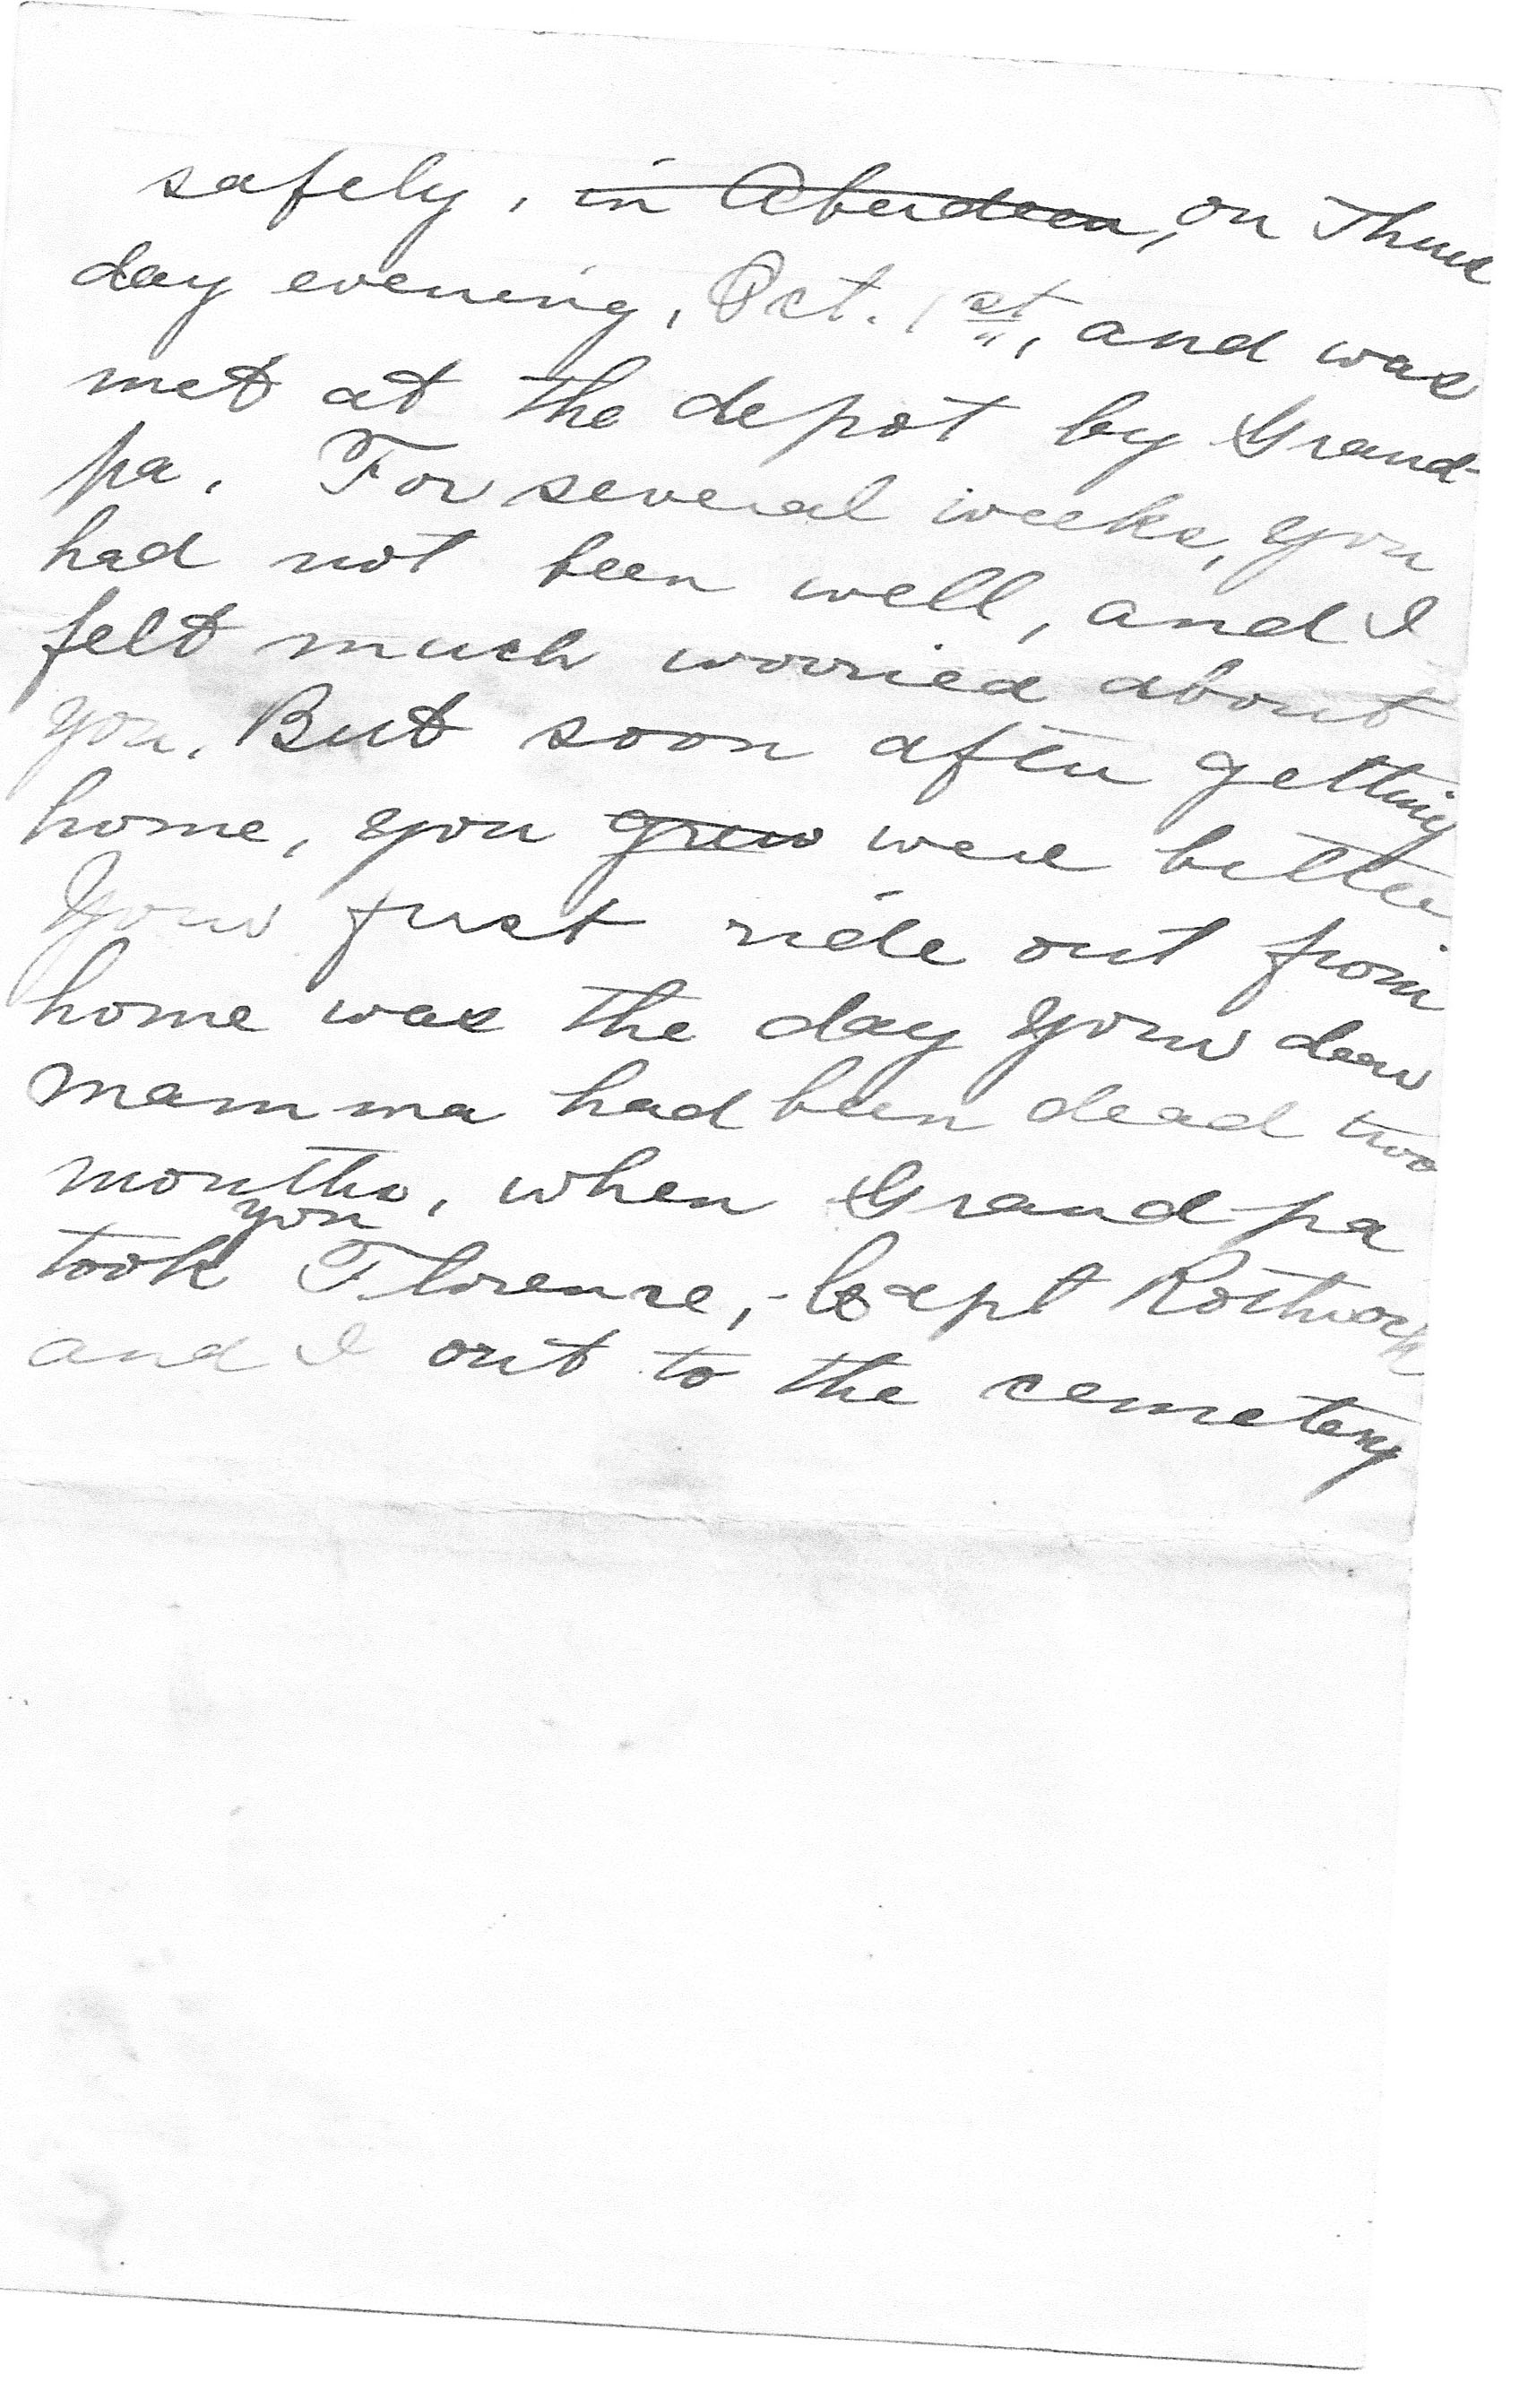 Letter to Horace page 9